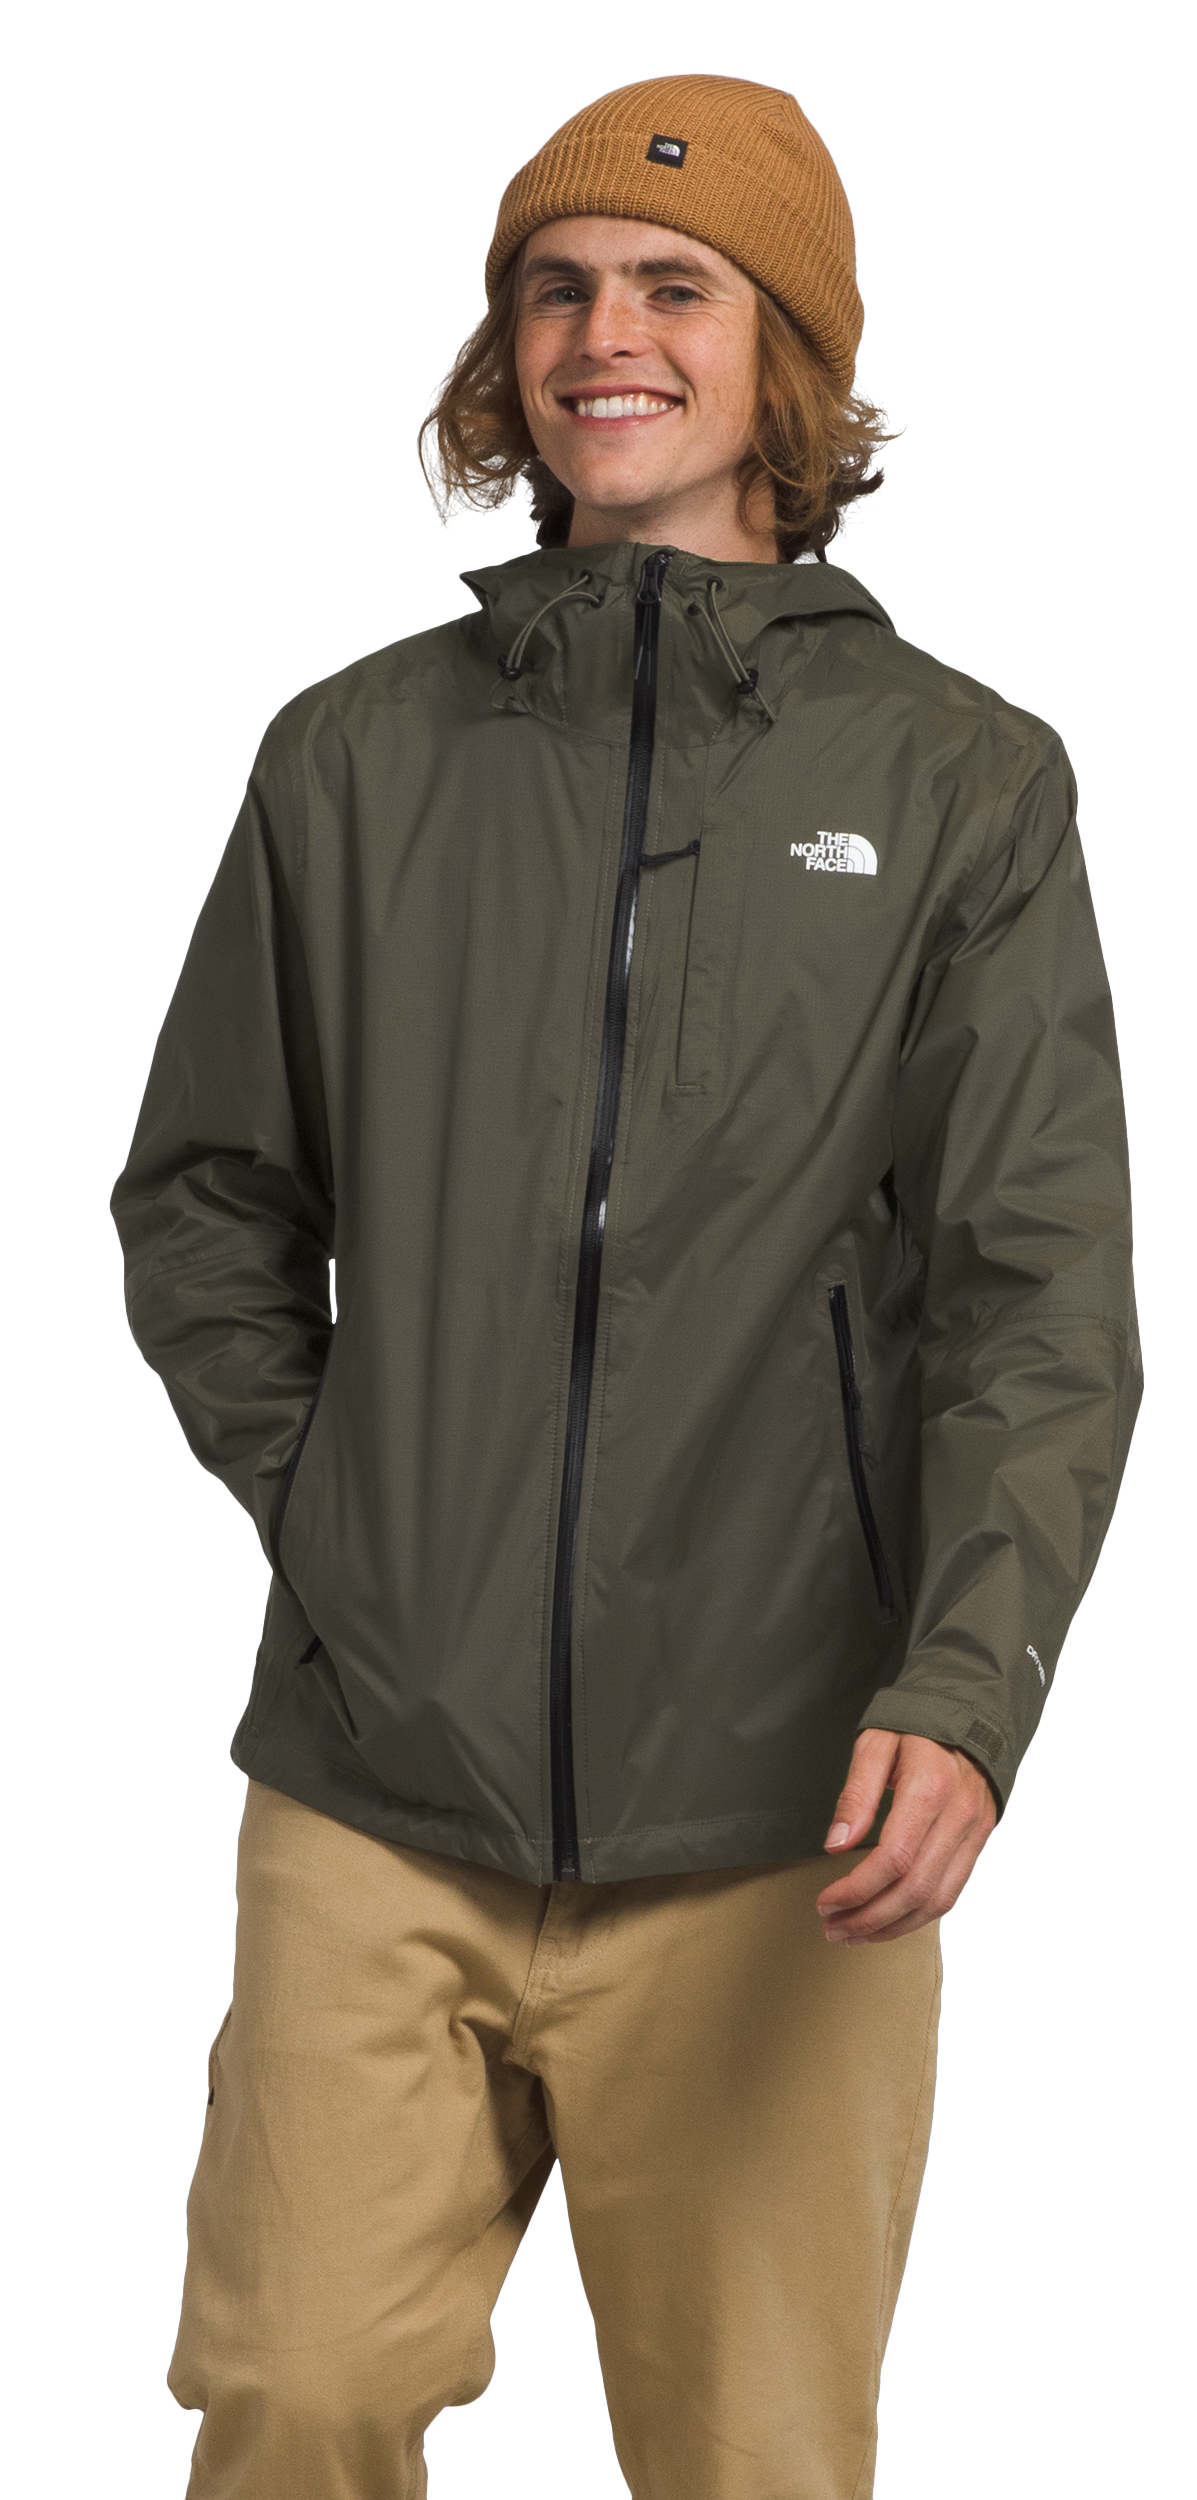 The North Face Alta Vista Jacket for Men - New Taupe Green - S